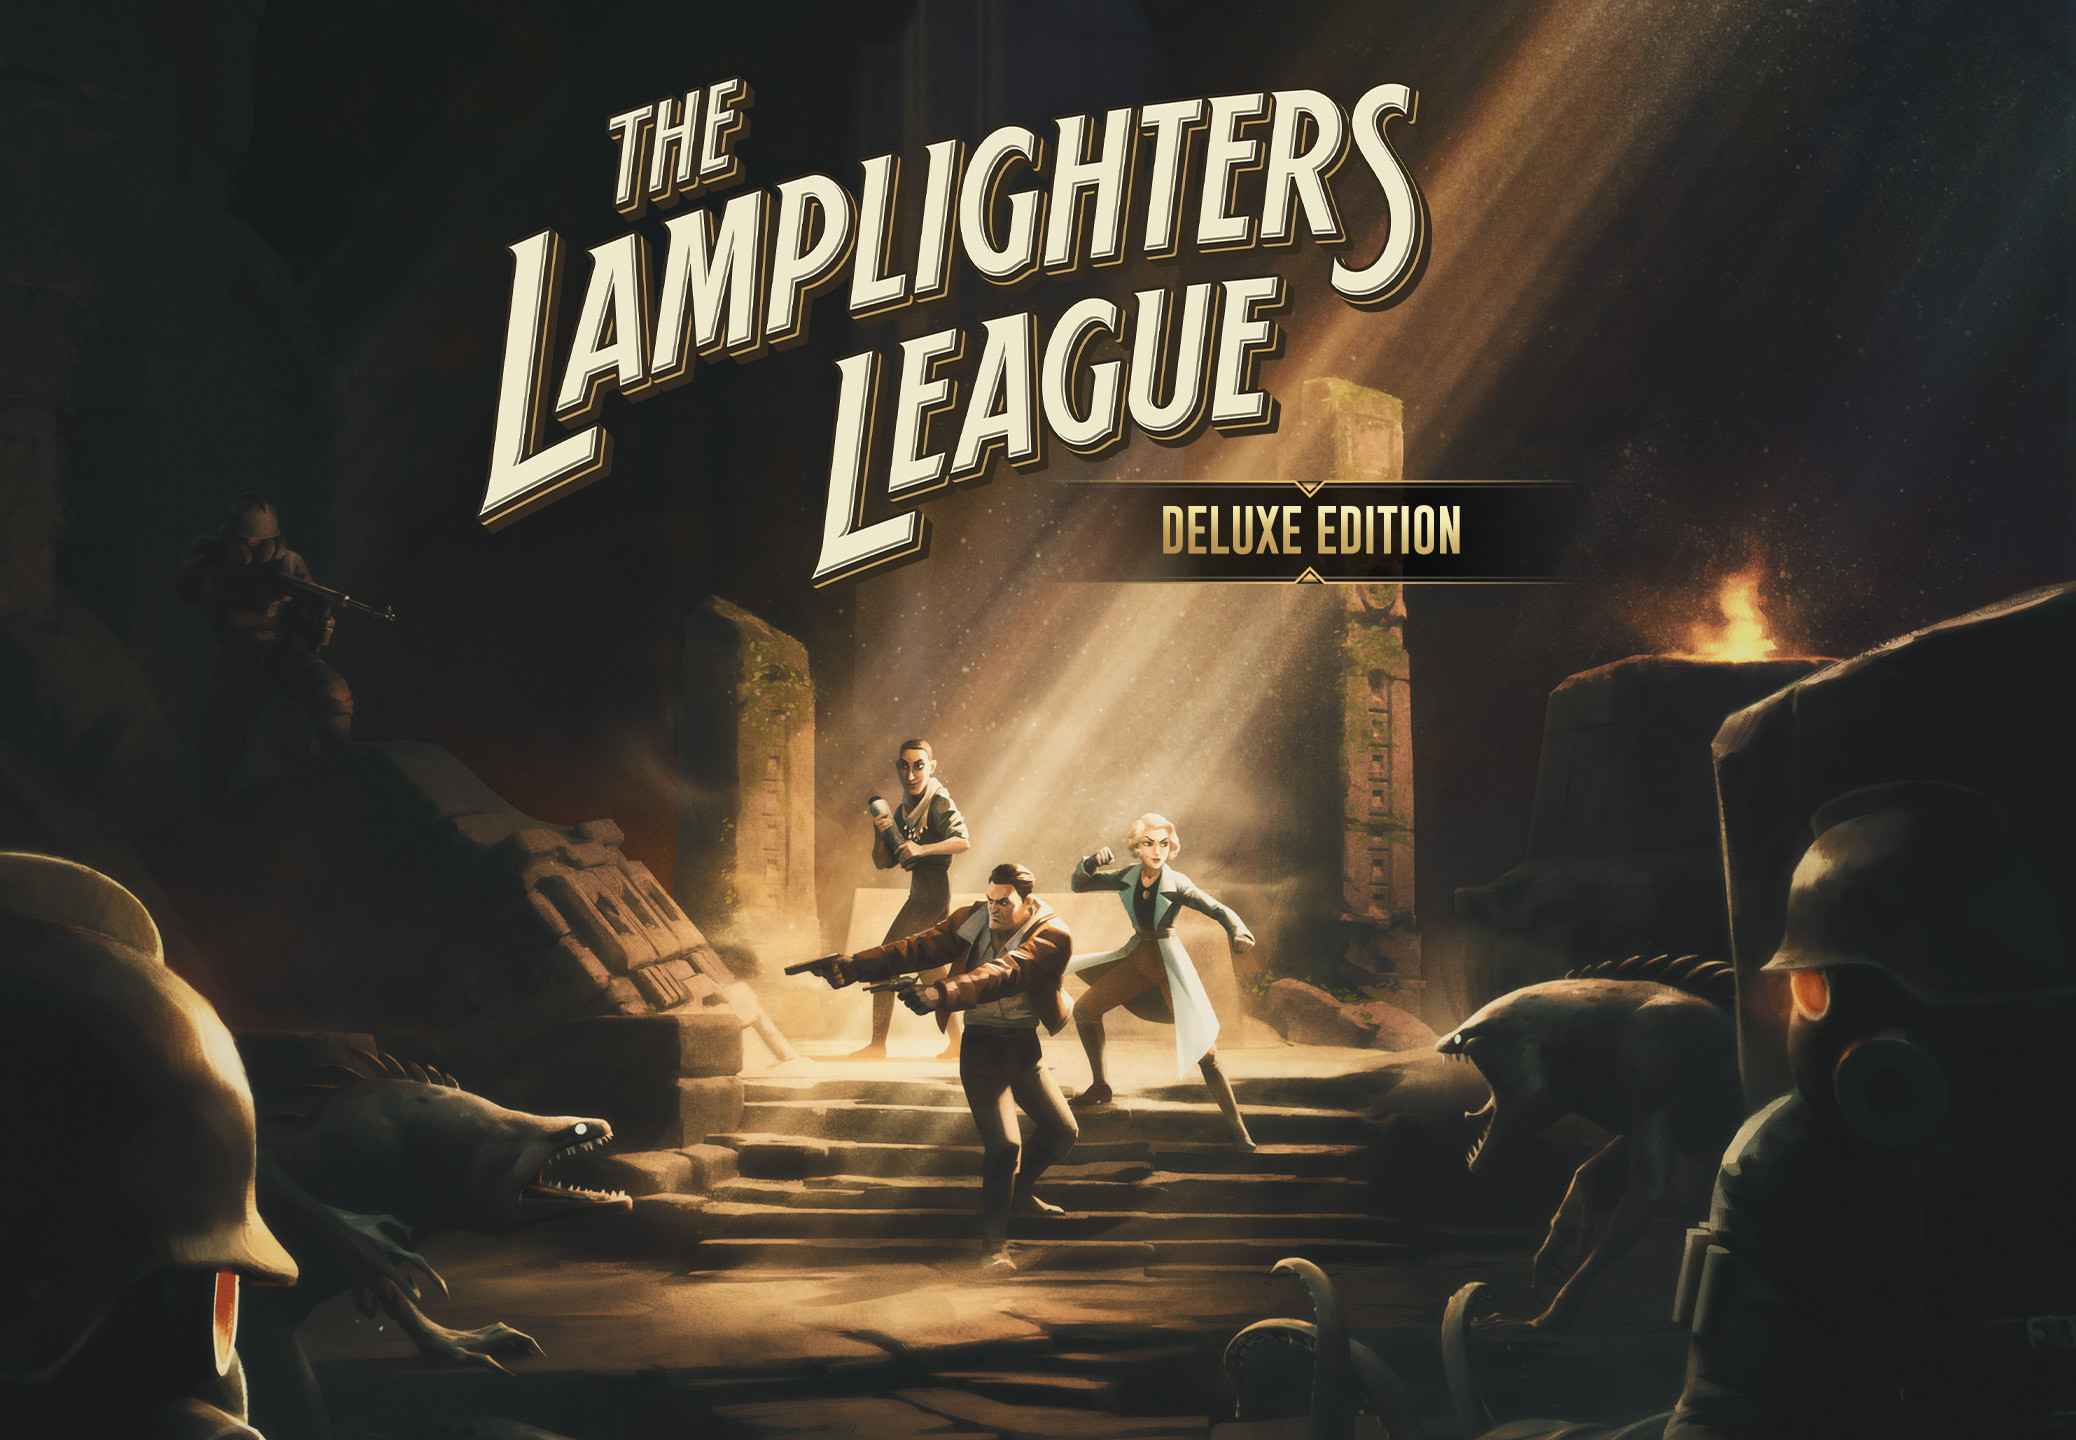 The Lamplighters League Deluxe Edition Steam CD Key